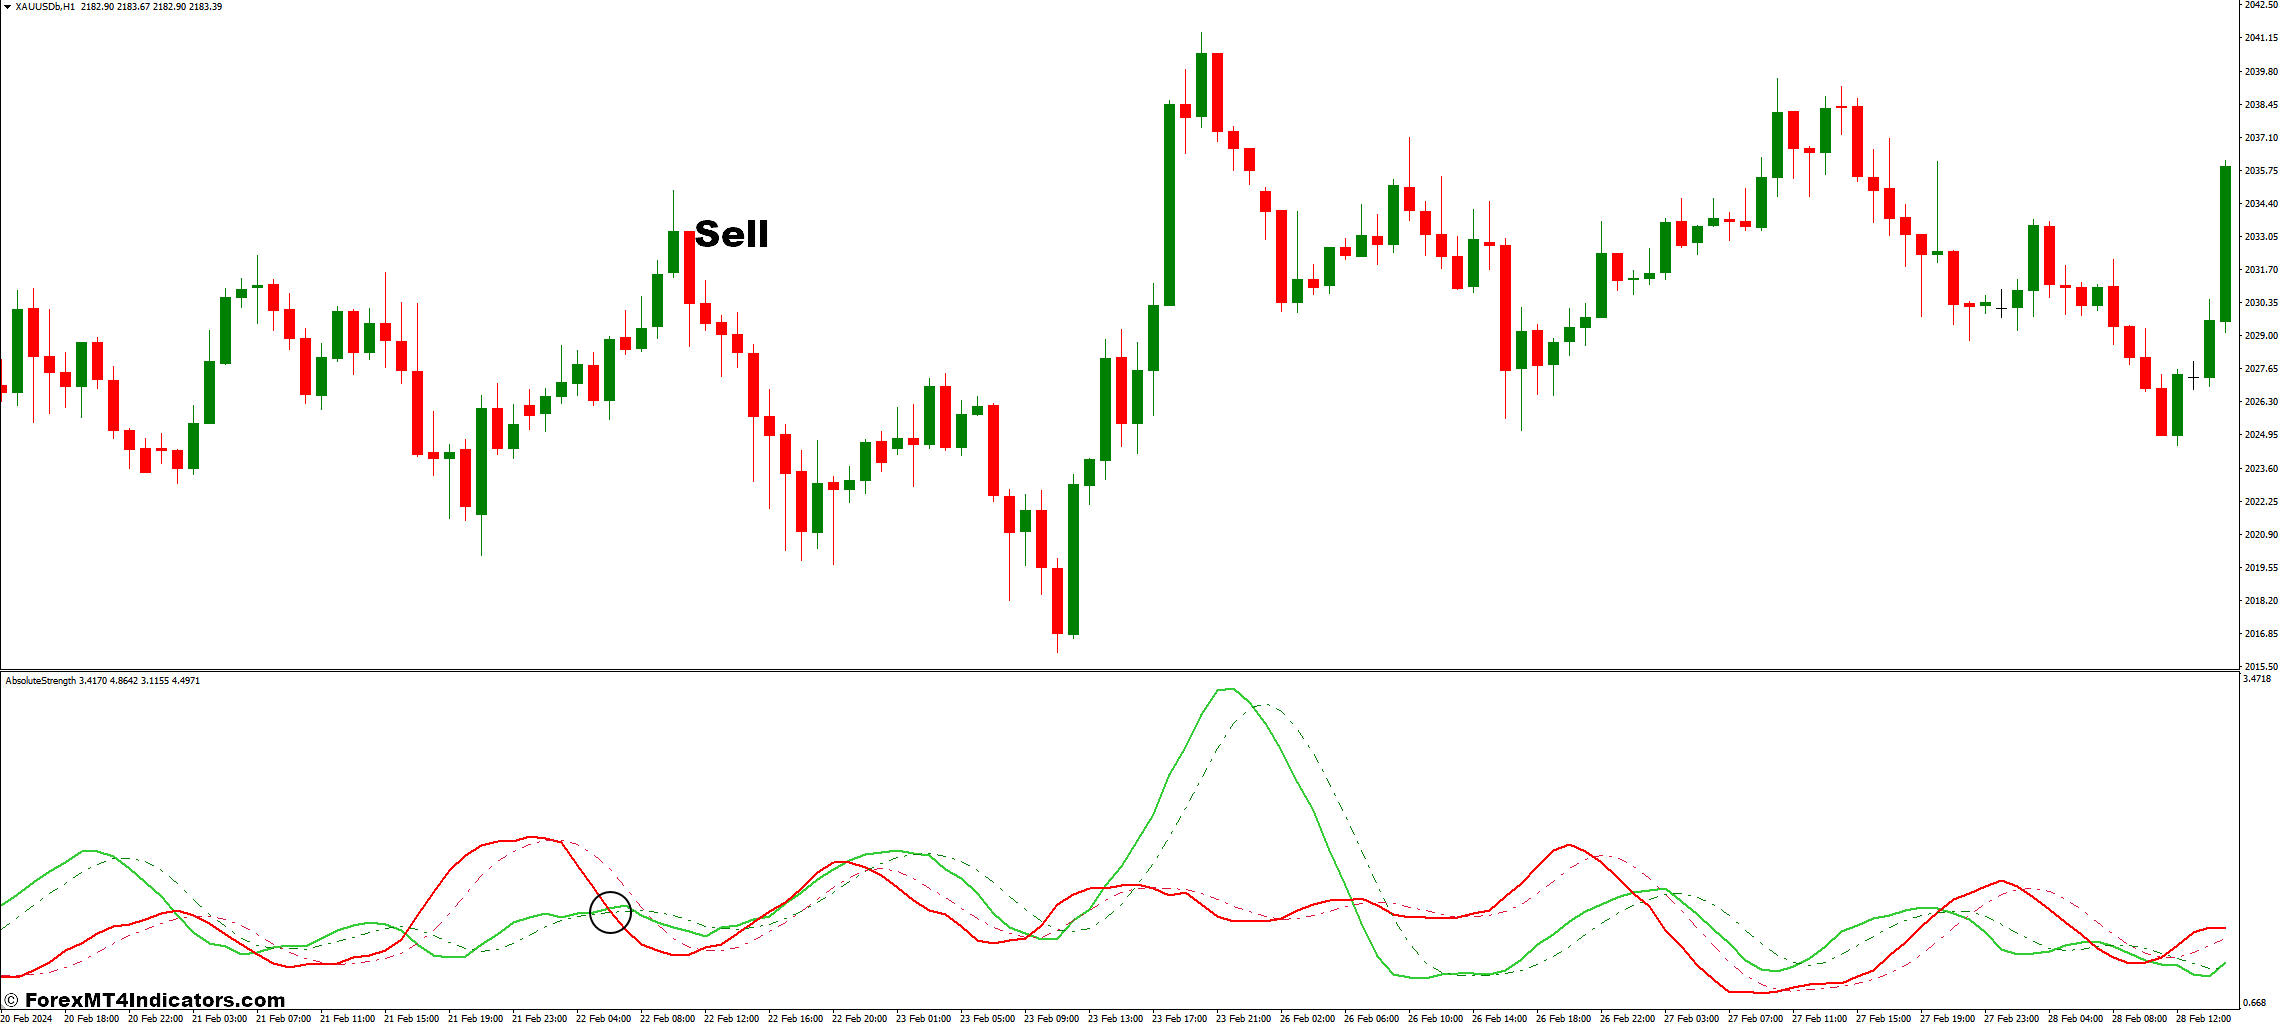 How To Trade With Absolute Strength Indicator - Sell Entry